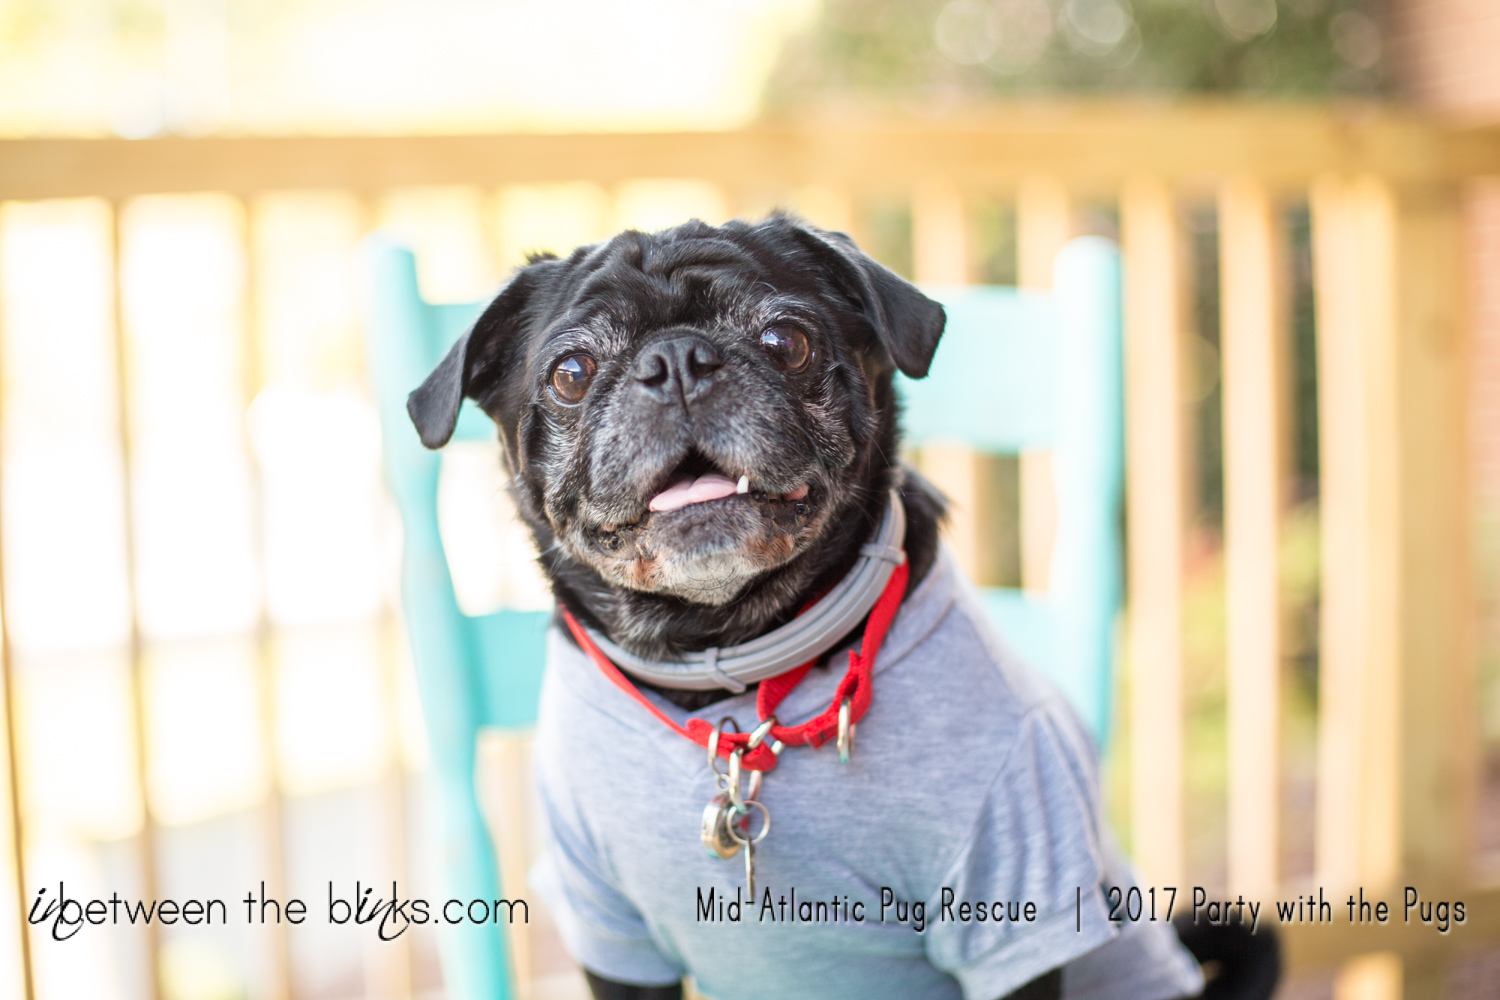 Party with the Pugs 2017 – Mid Atlantic Pug Rescue